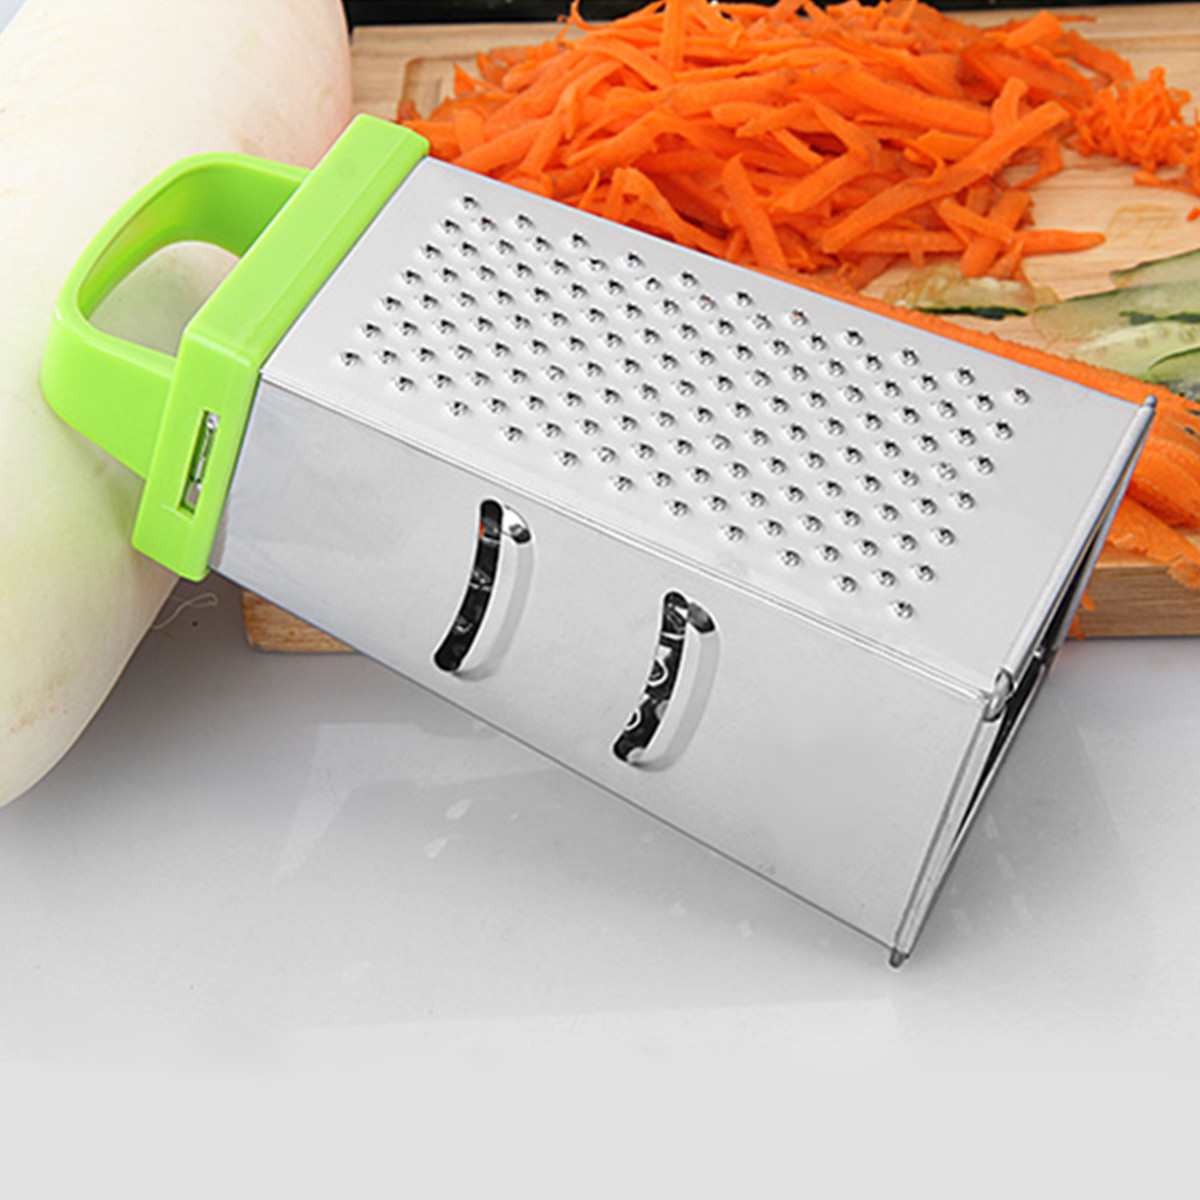 Grater-Box-Stainless-Steel-4-Sided-Multi-Funtion-Cheese-Vegetable-With-Container-Lunch-Box-1304772-5